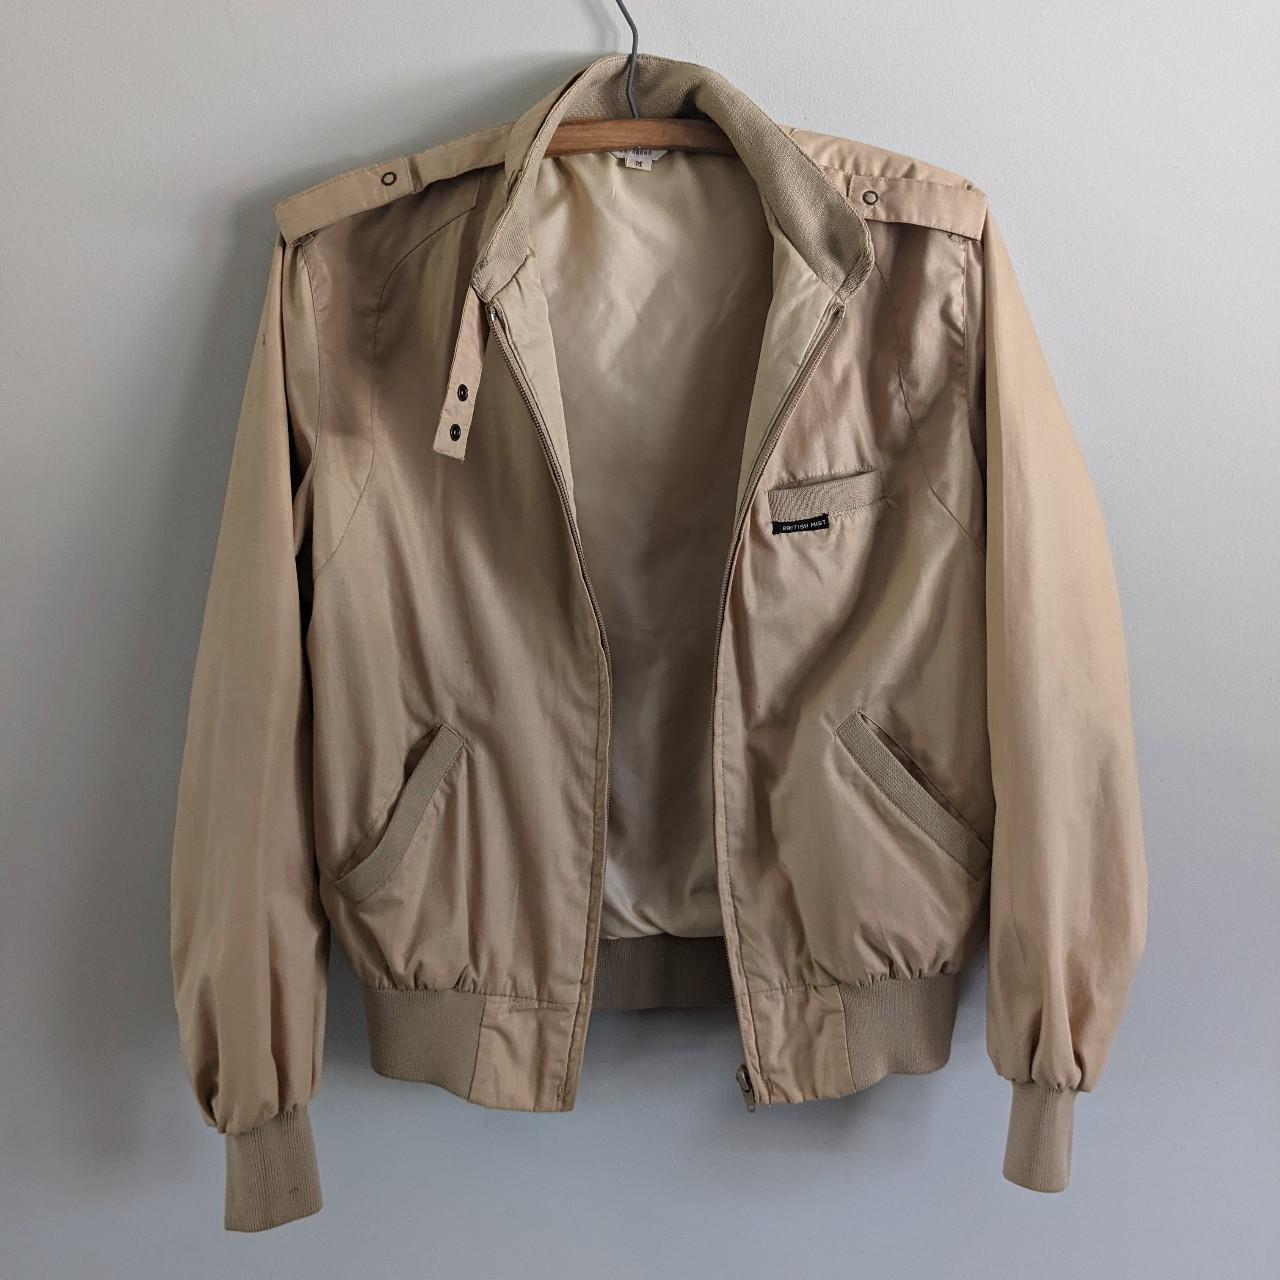 Members Only Women's Tan and Cream Jacket